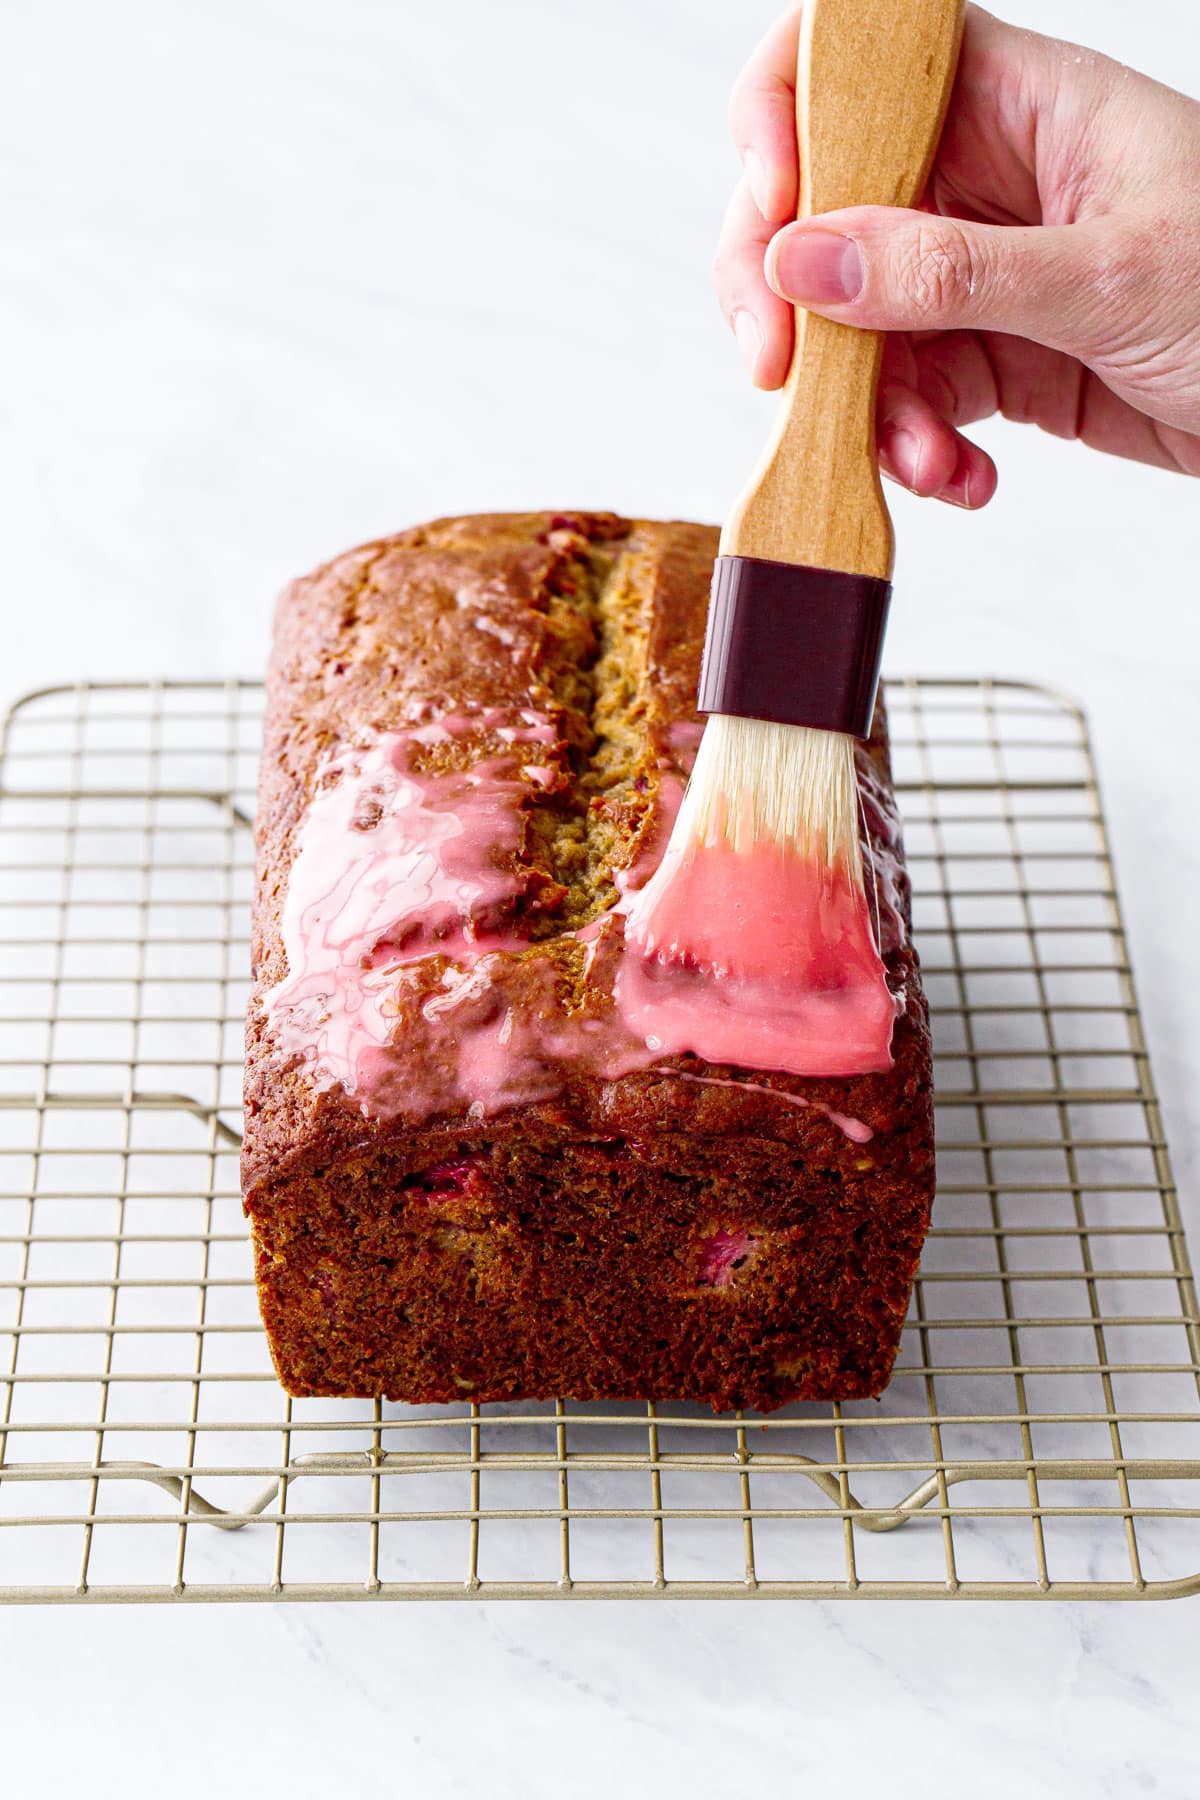 Brushing the baked loaf of banana bread with a bright pink strawberry glaze using a pastry brush.